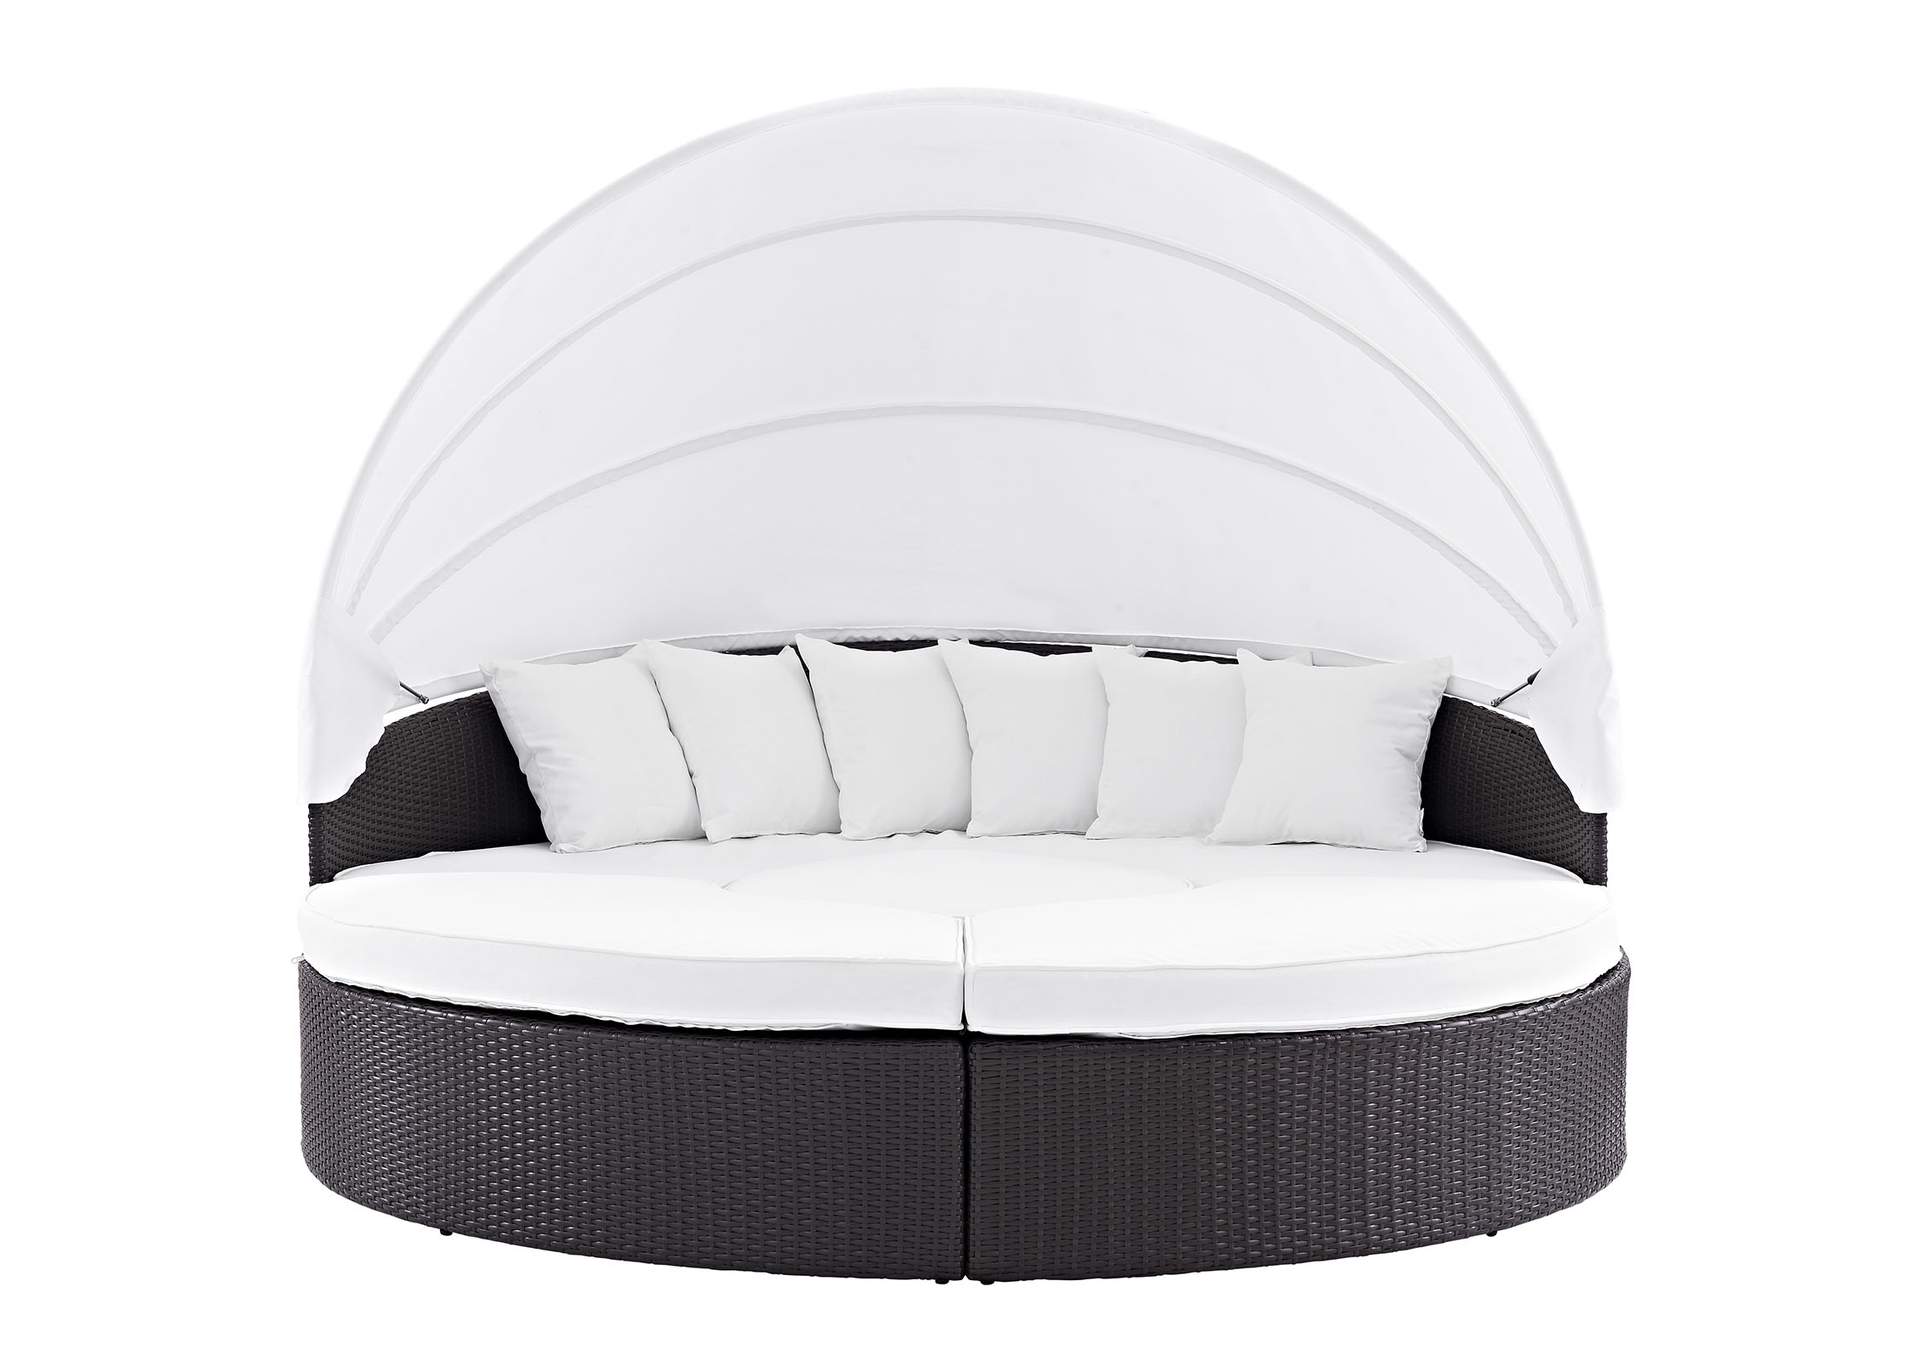 Espresso White Convene Canopy Outdoor Patio Daybed,Modway